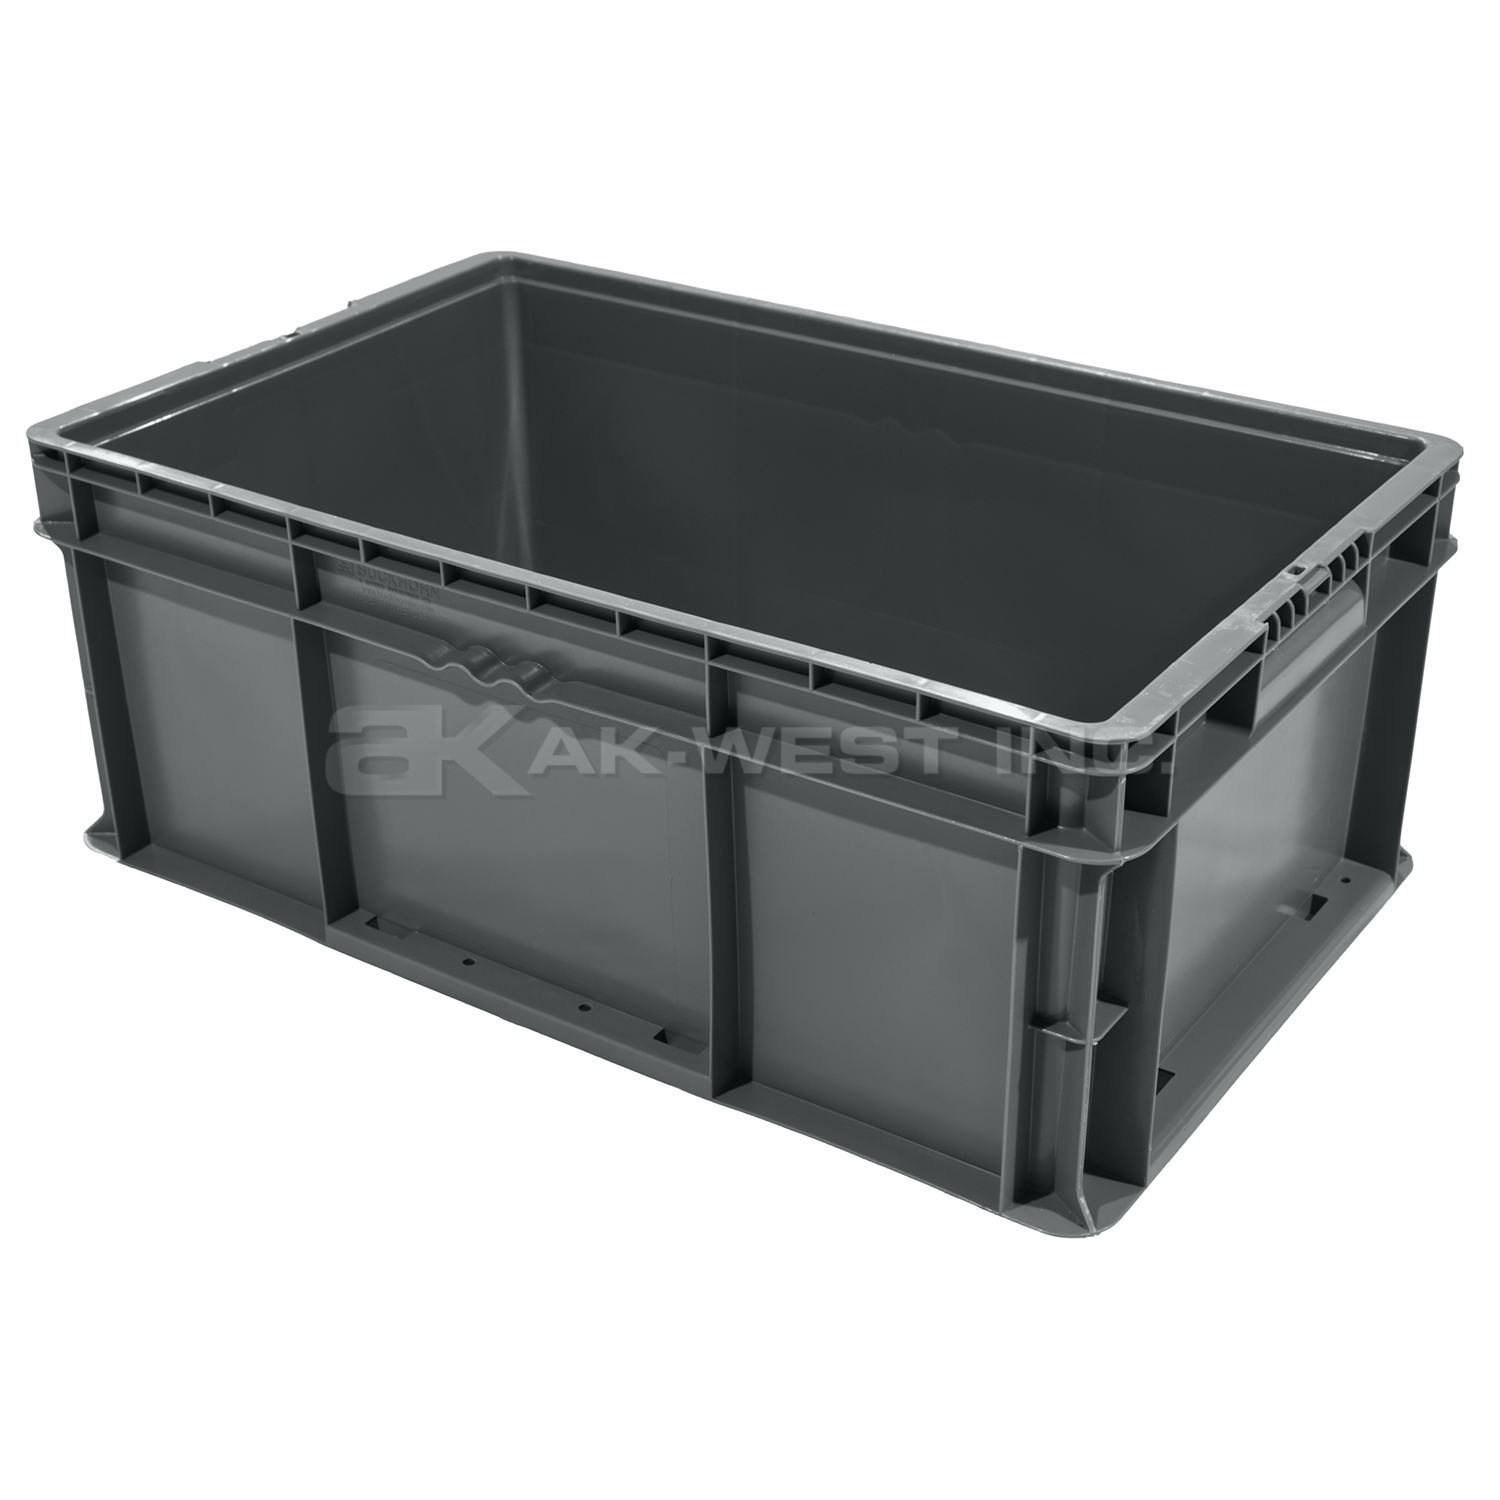 Grey, 24" x 15" x 9", Straight Wall Container